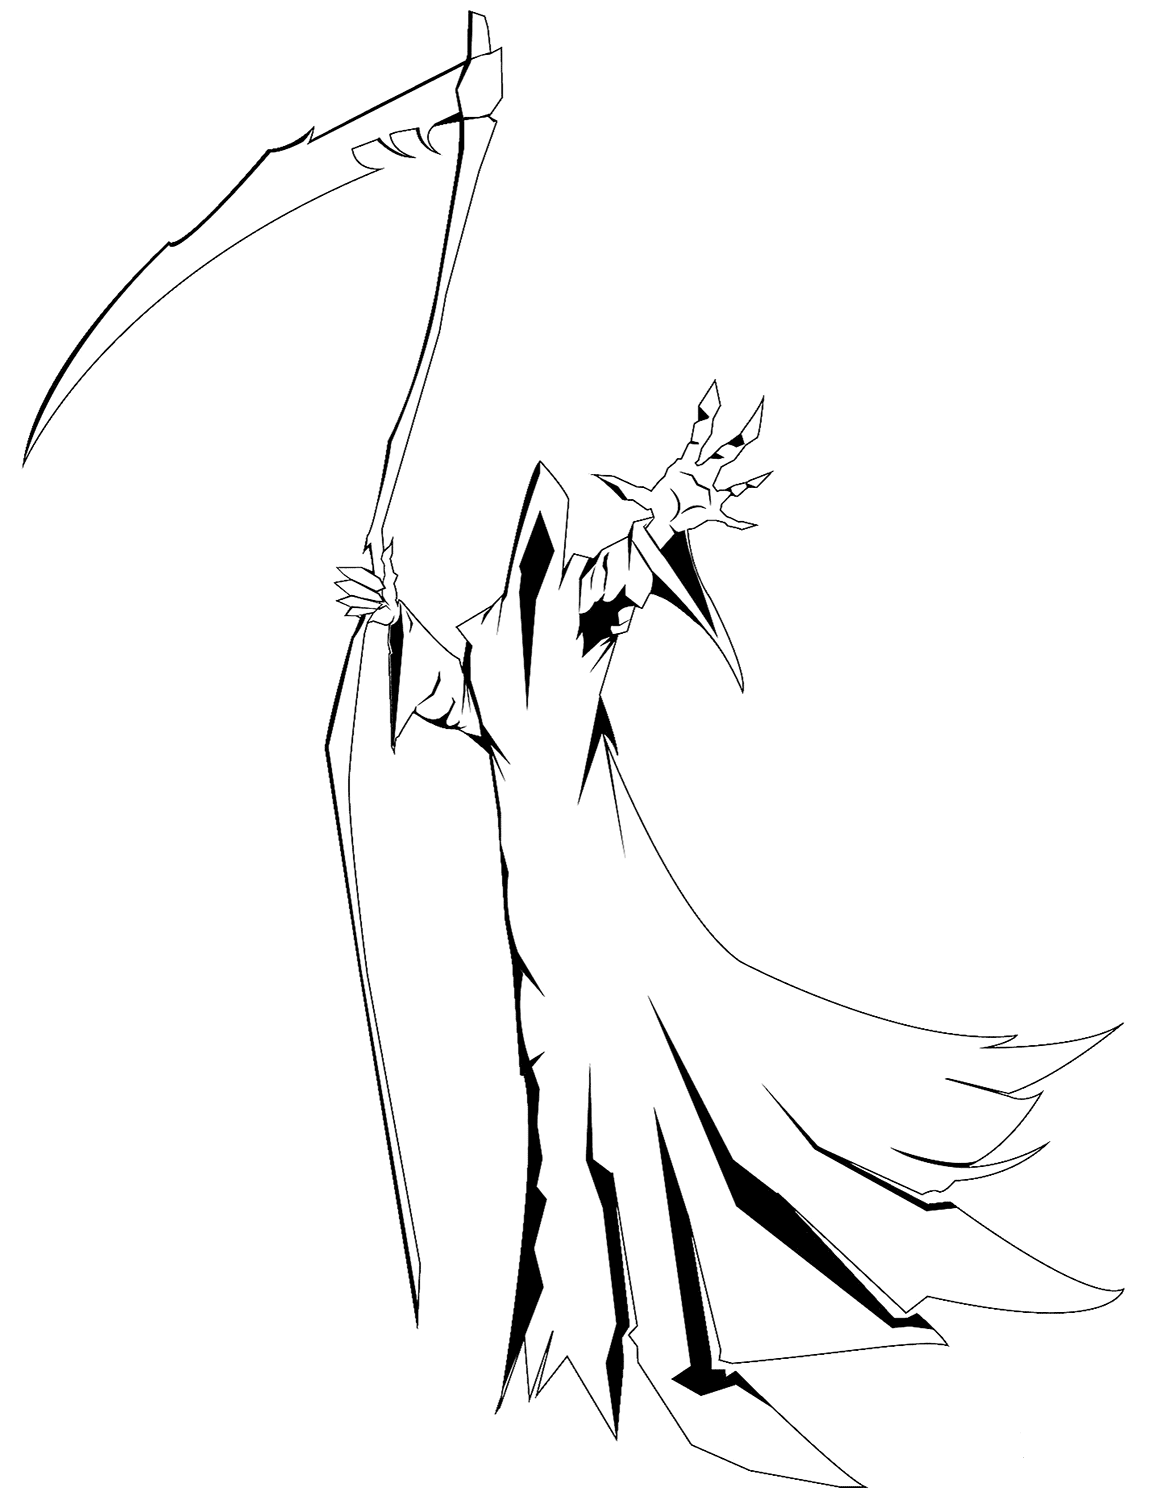 Grim Reaper coloring page